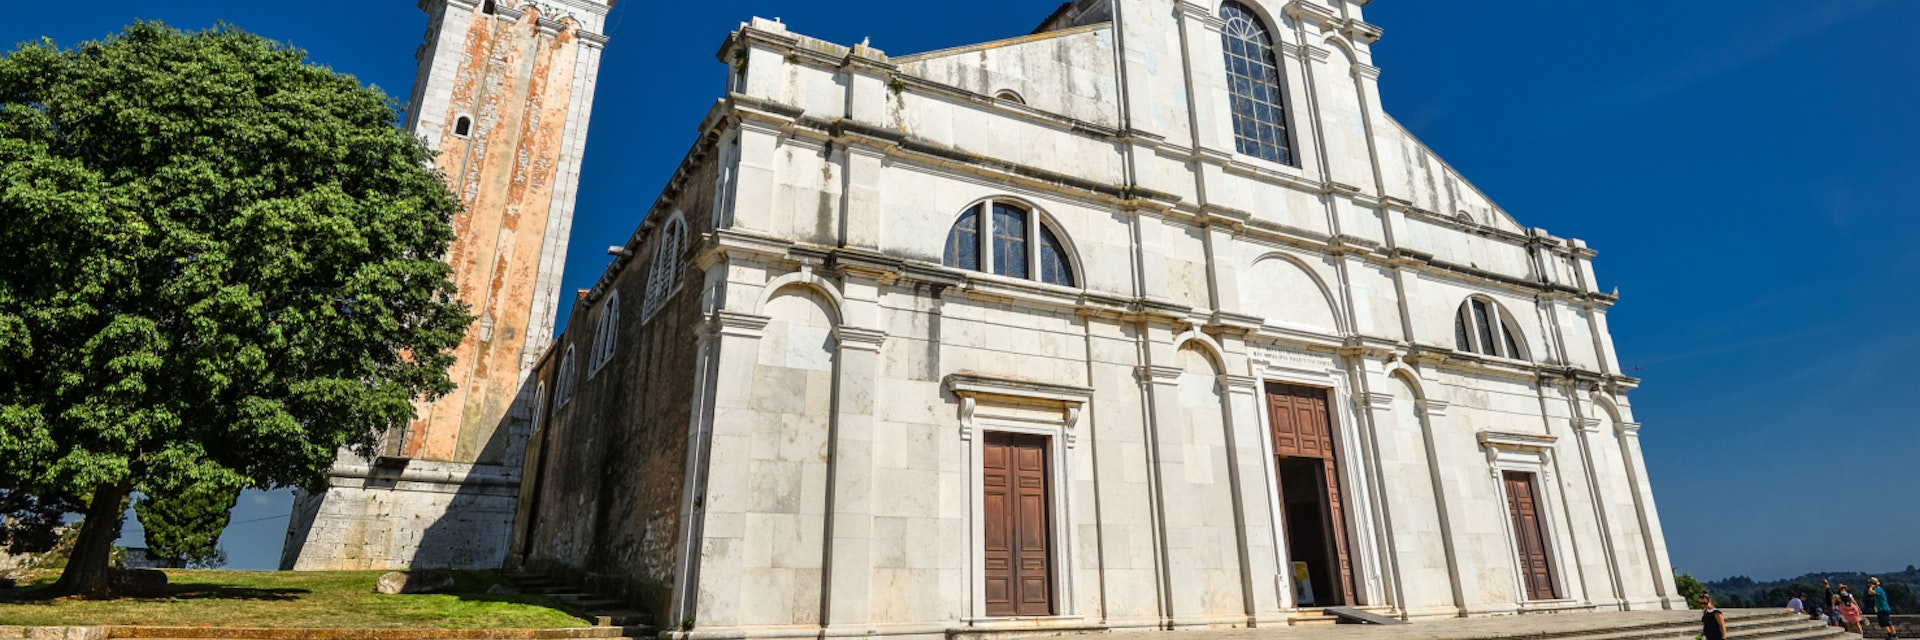 Rovinj, Croatia - May 22, 2018: St. Euphemia's Basilica, Rovinj, Croatia. Аn ancient church with a bell tower.; Shutterstock ID 1138512785; Your name (First / Last): Anna Tyler; GL account no.: 65050; Netsuite department name: Online Editorial; Full Product or Project name including edition: destination-image-southern-europe